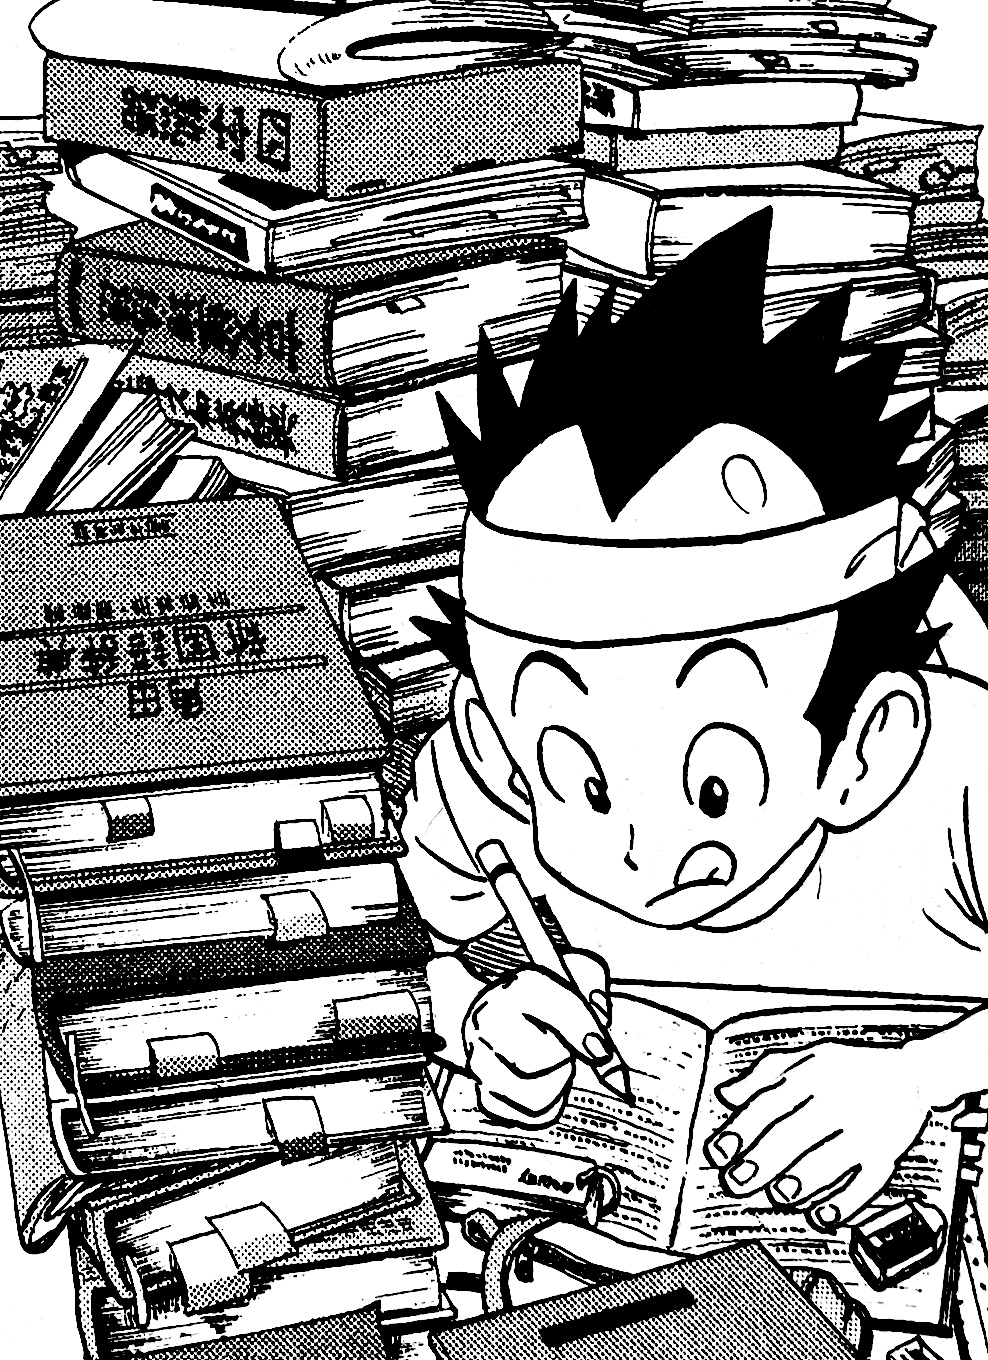 An illustration of a chibified Yukimitsu studying and writing notes around tall piles of textbooks. A hachimaki is tied around his head, a flashcard ring lies beside him, and he's licking his lips in concentration.